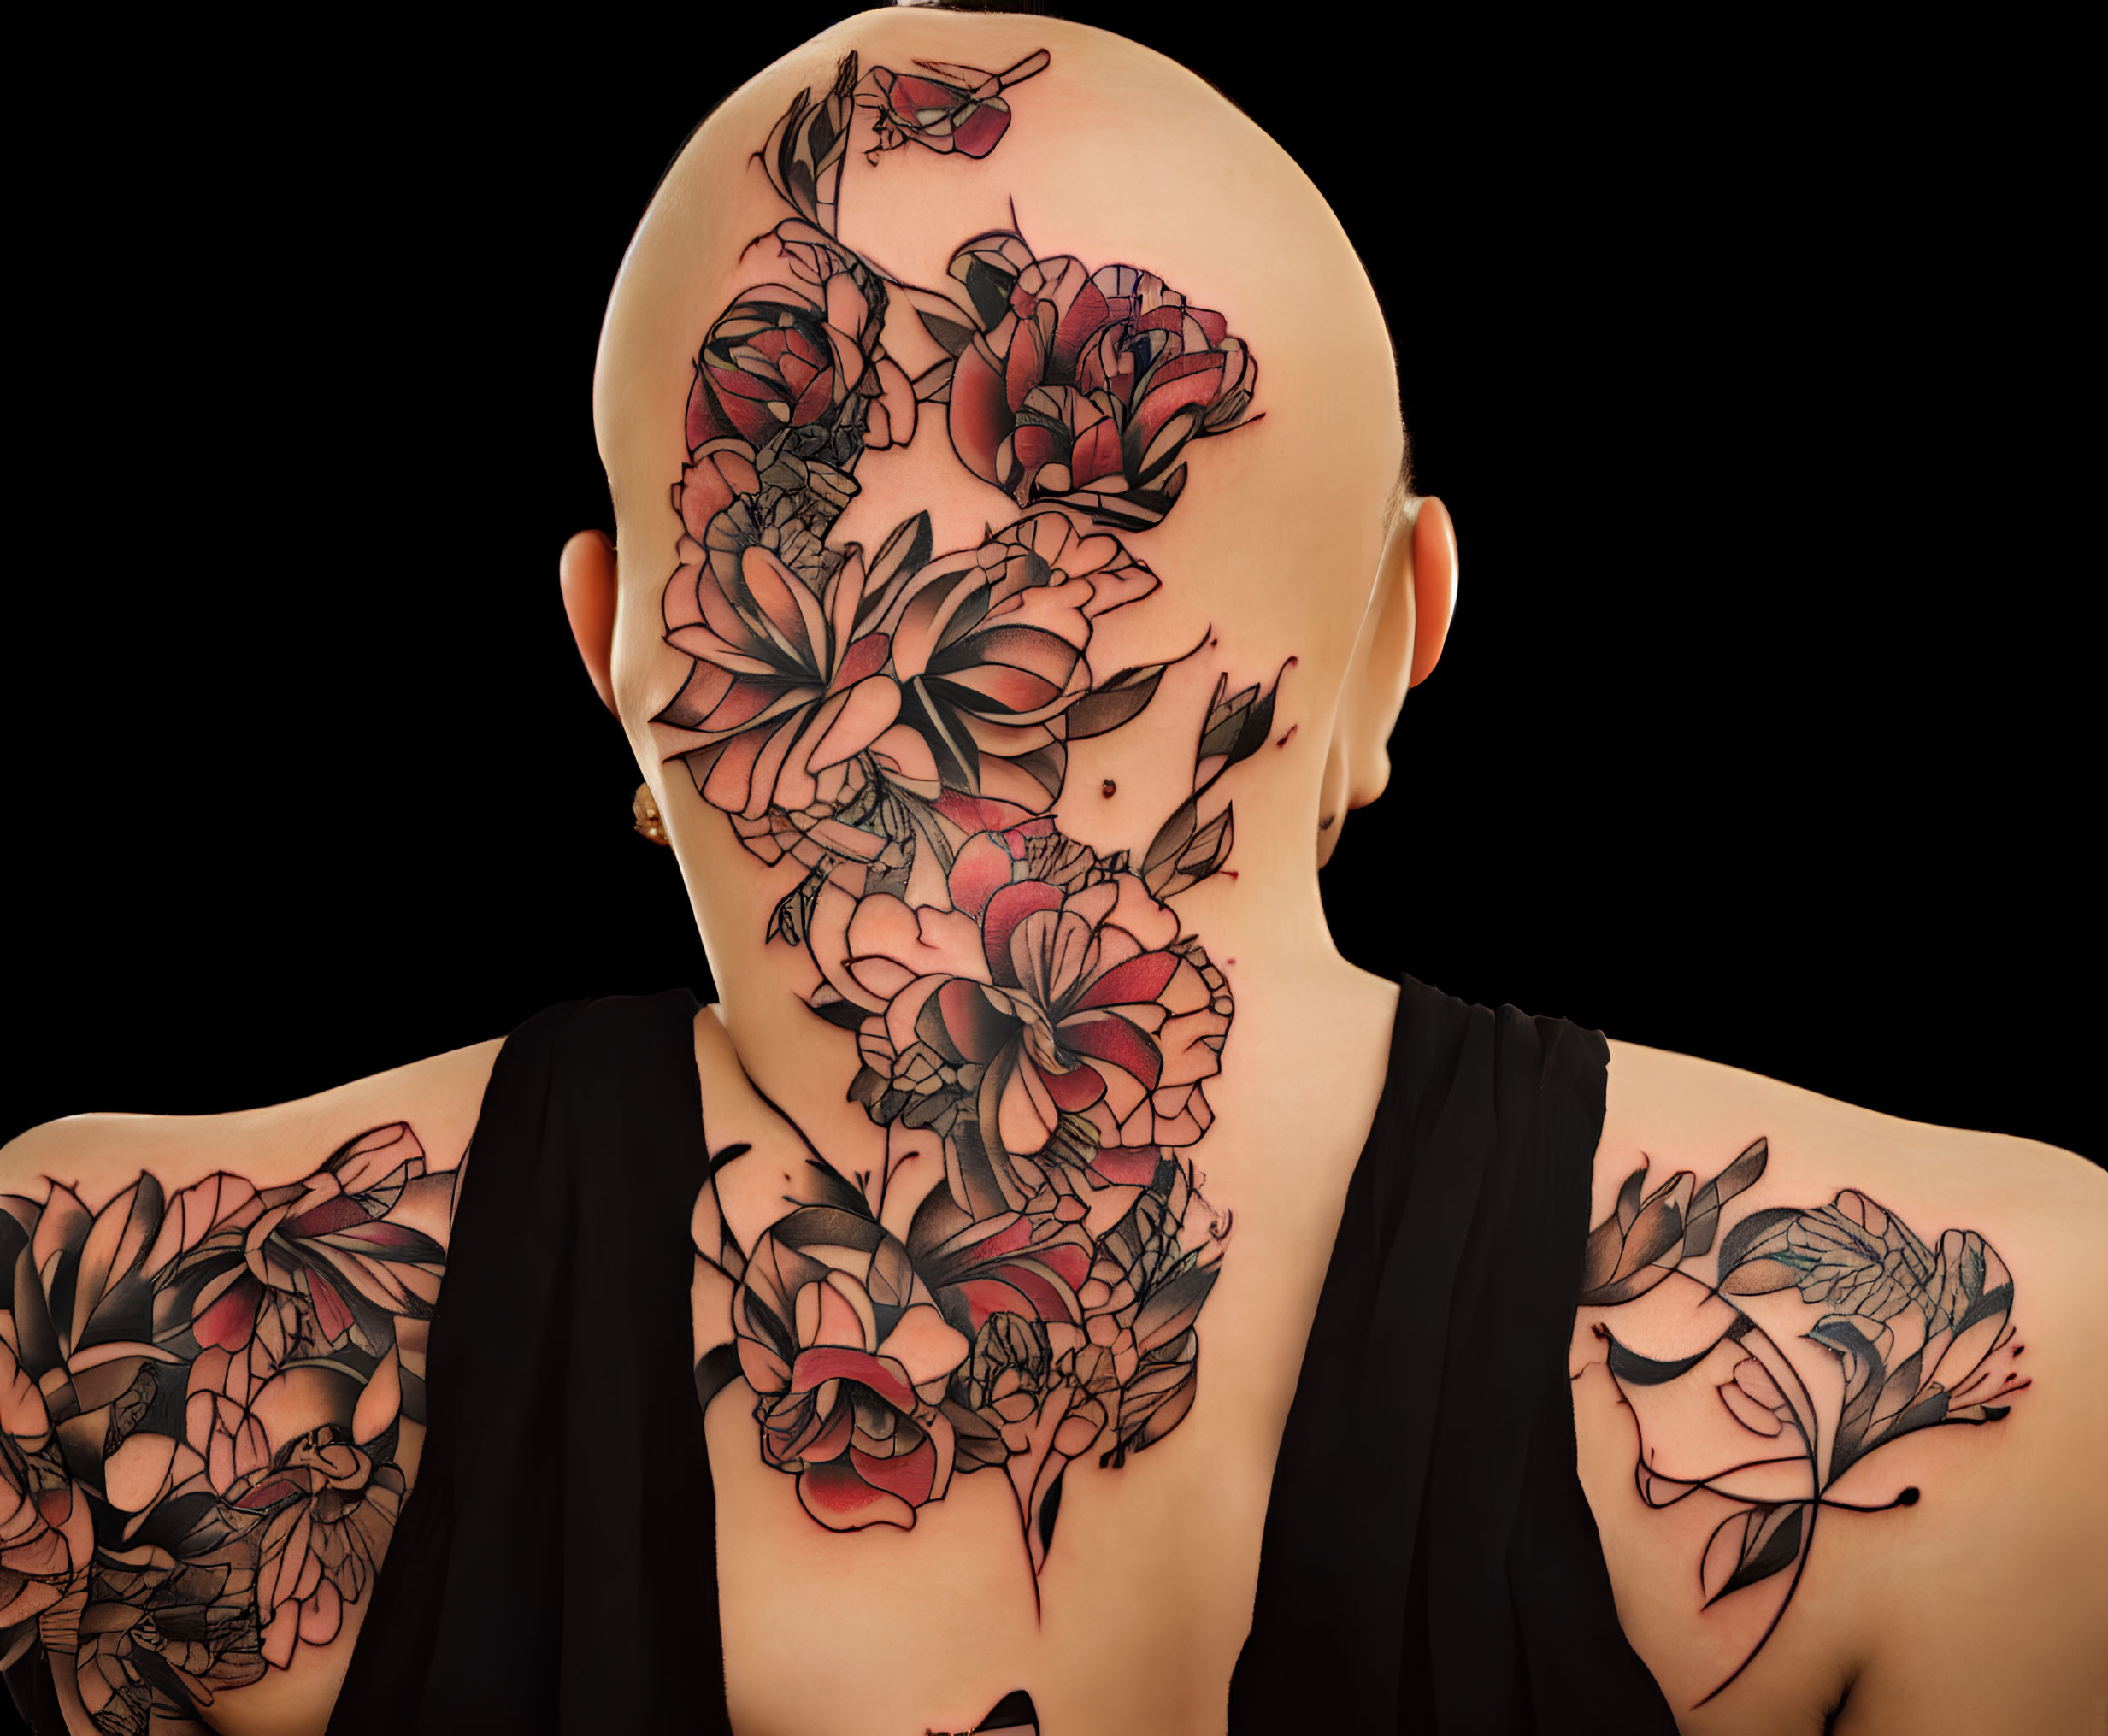 Bald Person with Red and Black Floral Tattoo on Shoulders